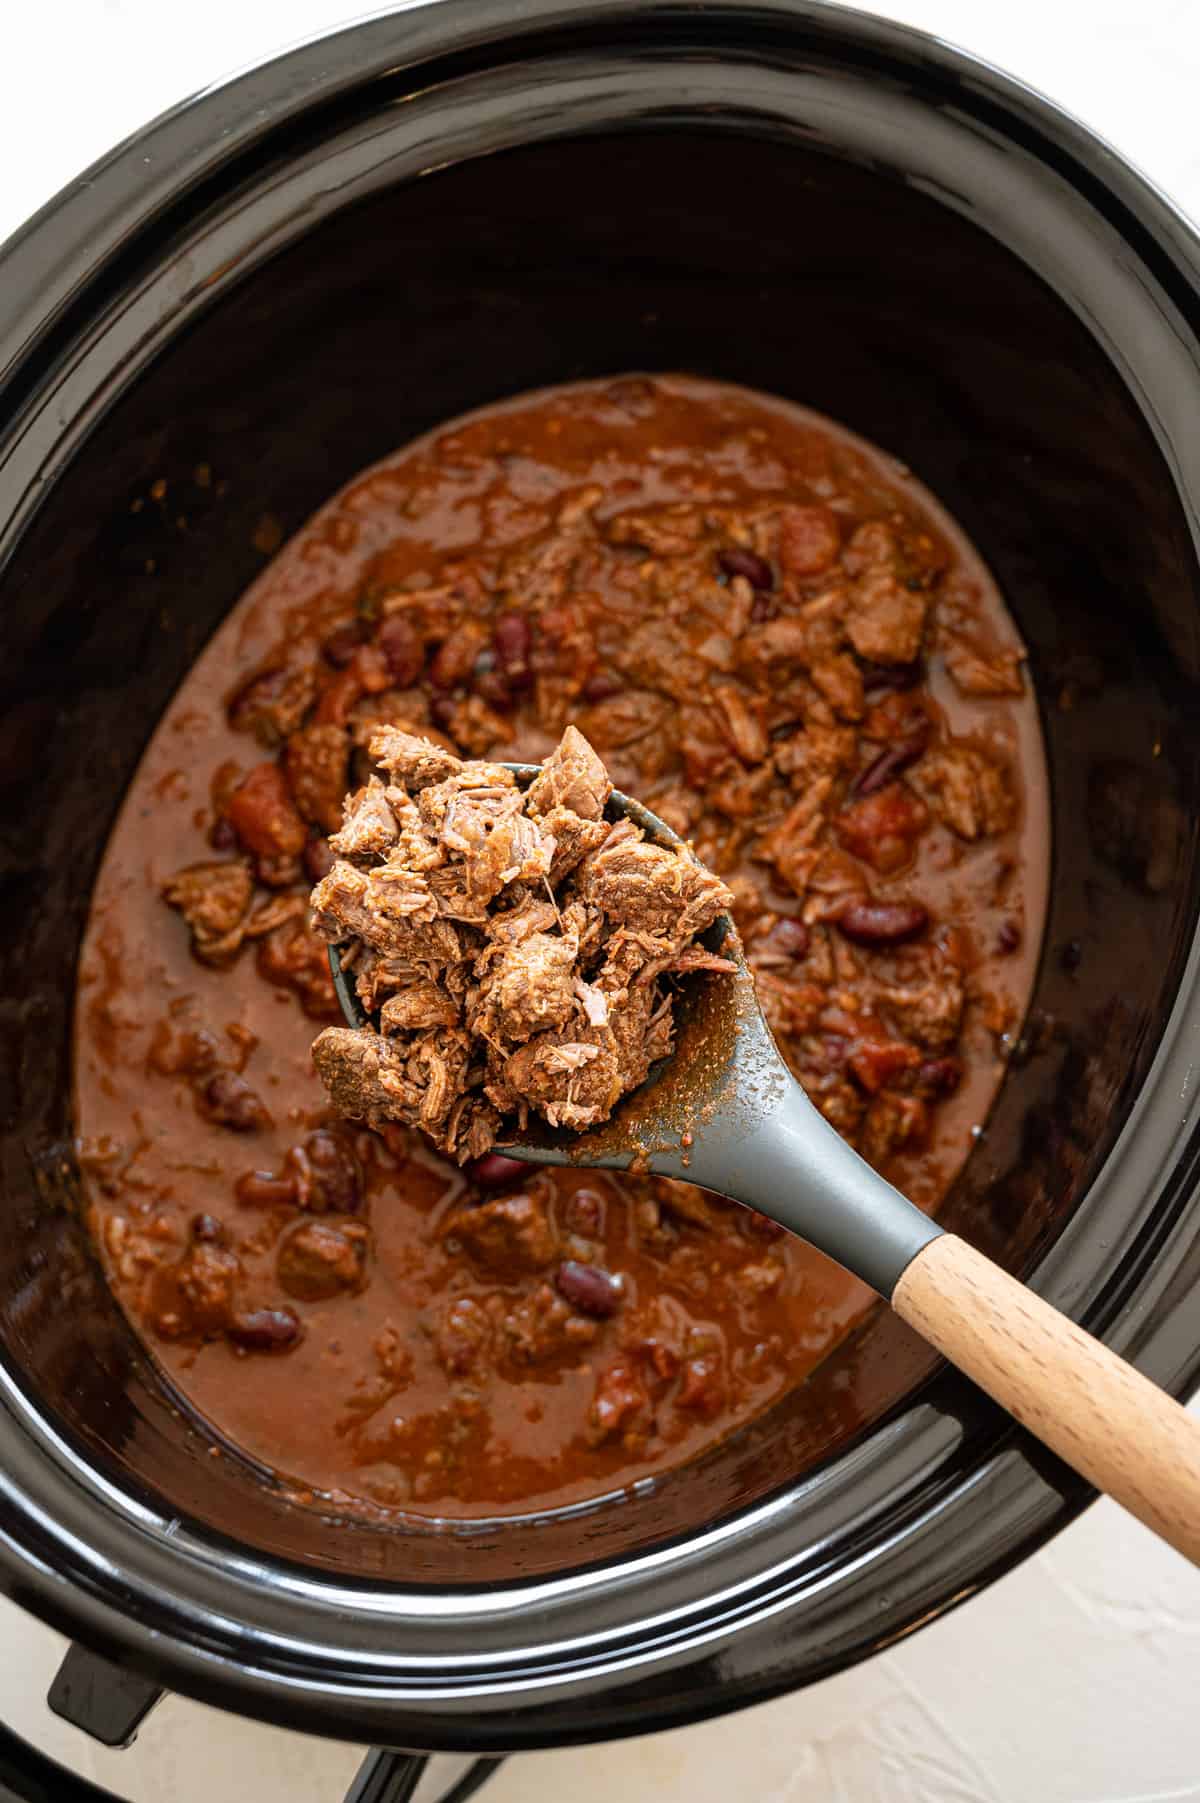 Steak chili being served with a wooden spoon out of a slow cooker.